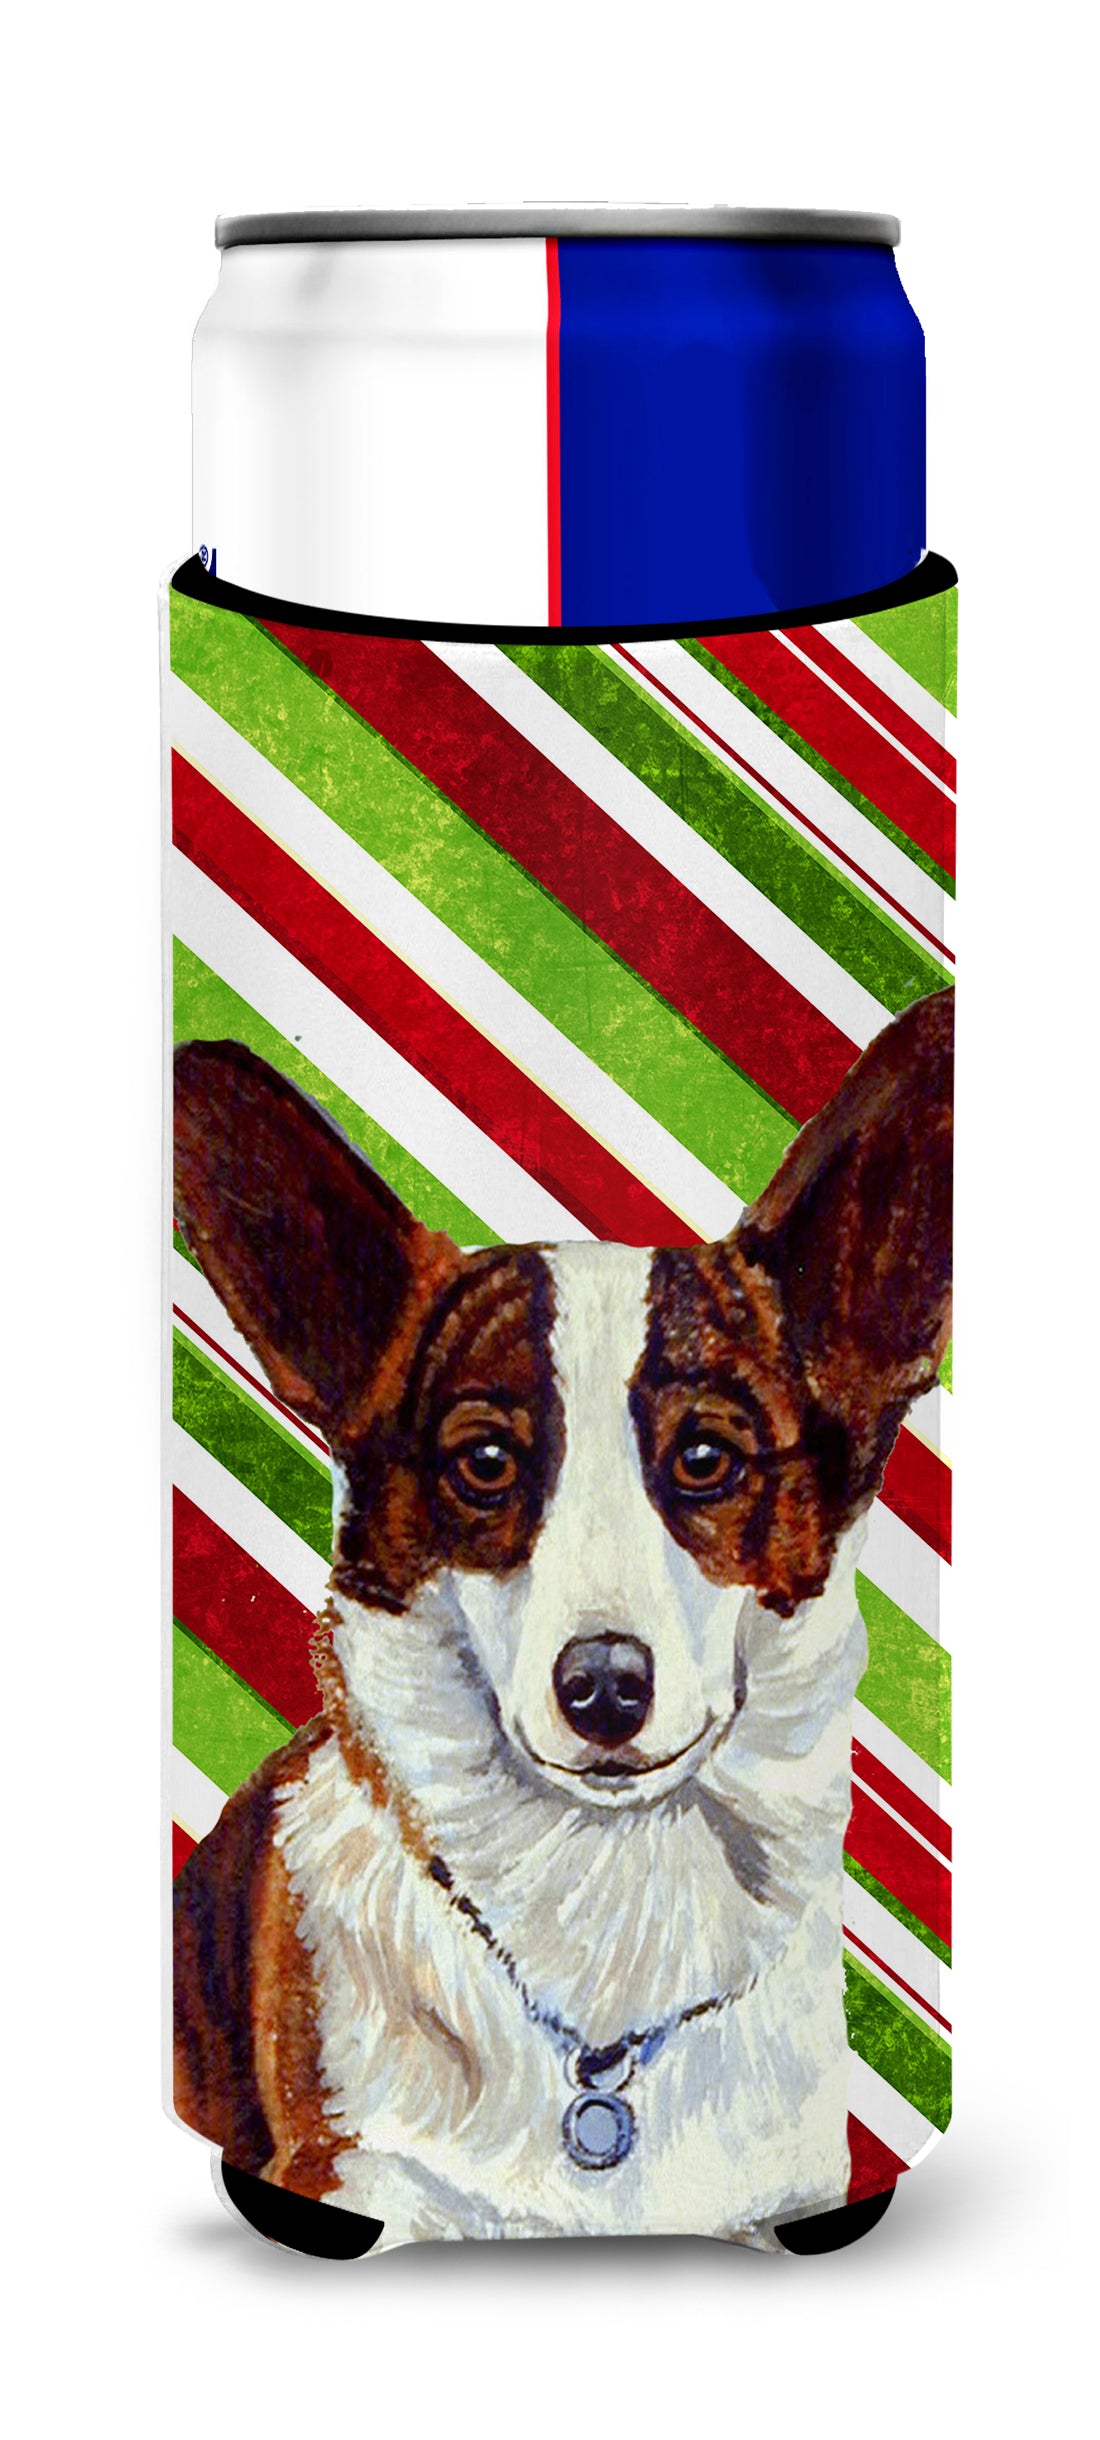 Corgi Candy Cane Holiday Christmas Ultra Beverage Insulators for slim cans LH9243MUK